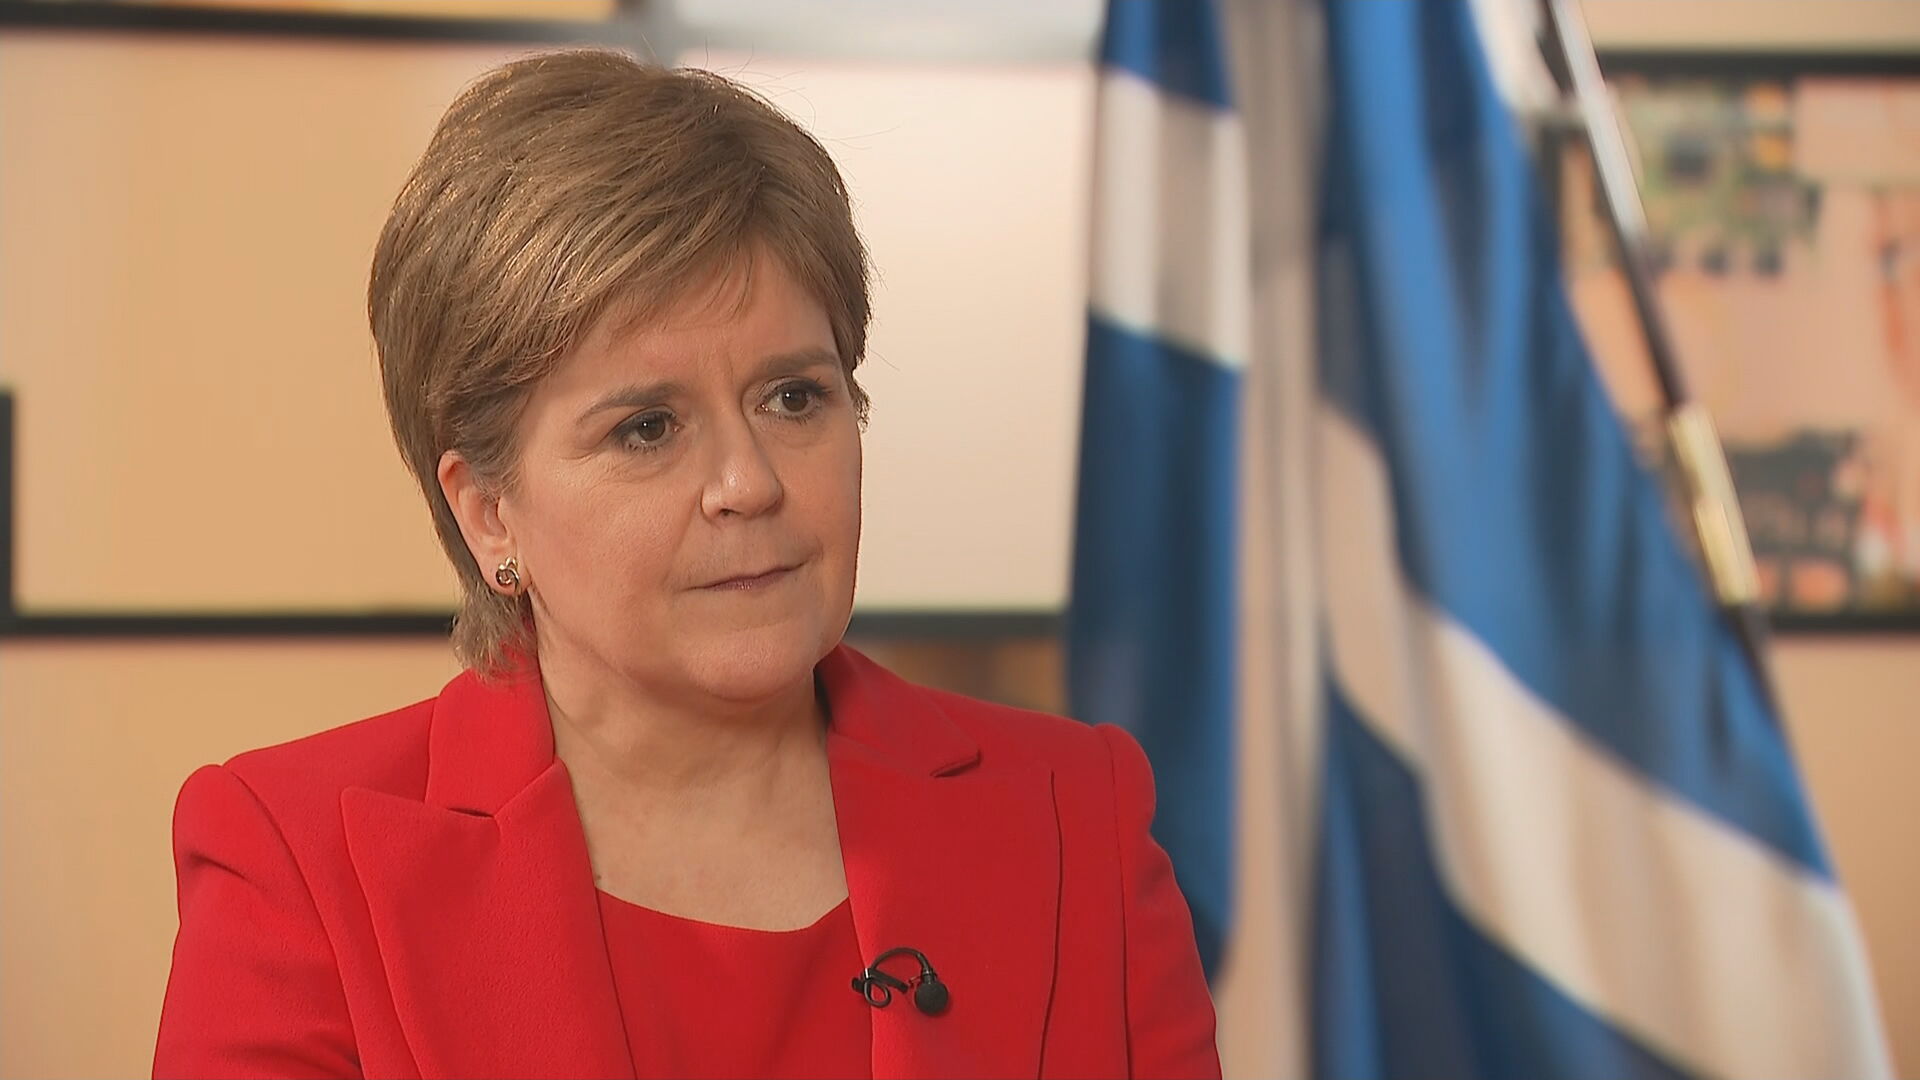 Nicola Sturgeon said she was not aware that her party had lost 30,000 members.